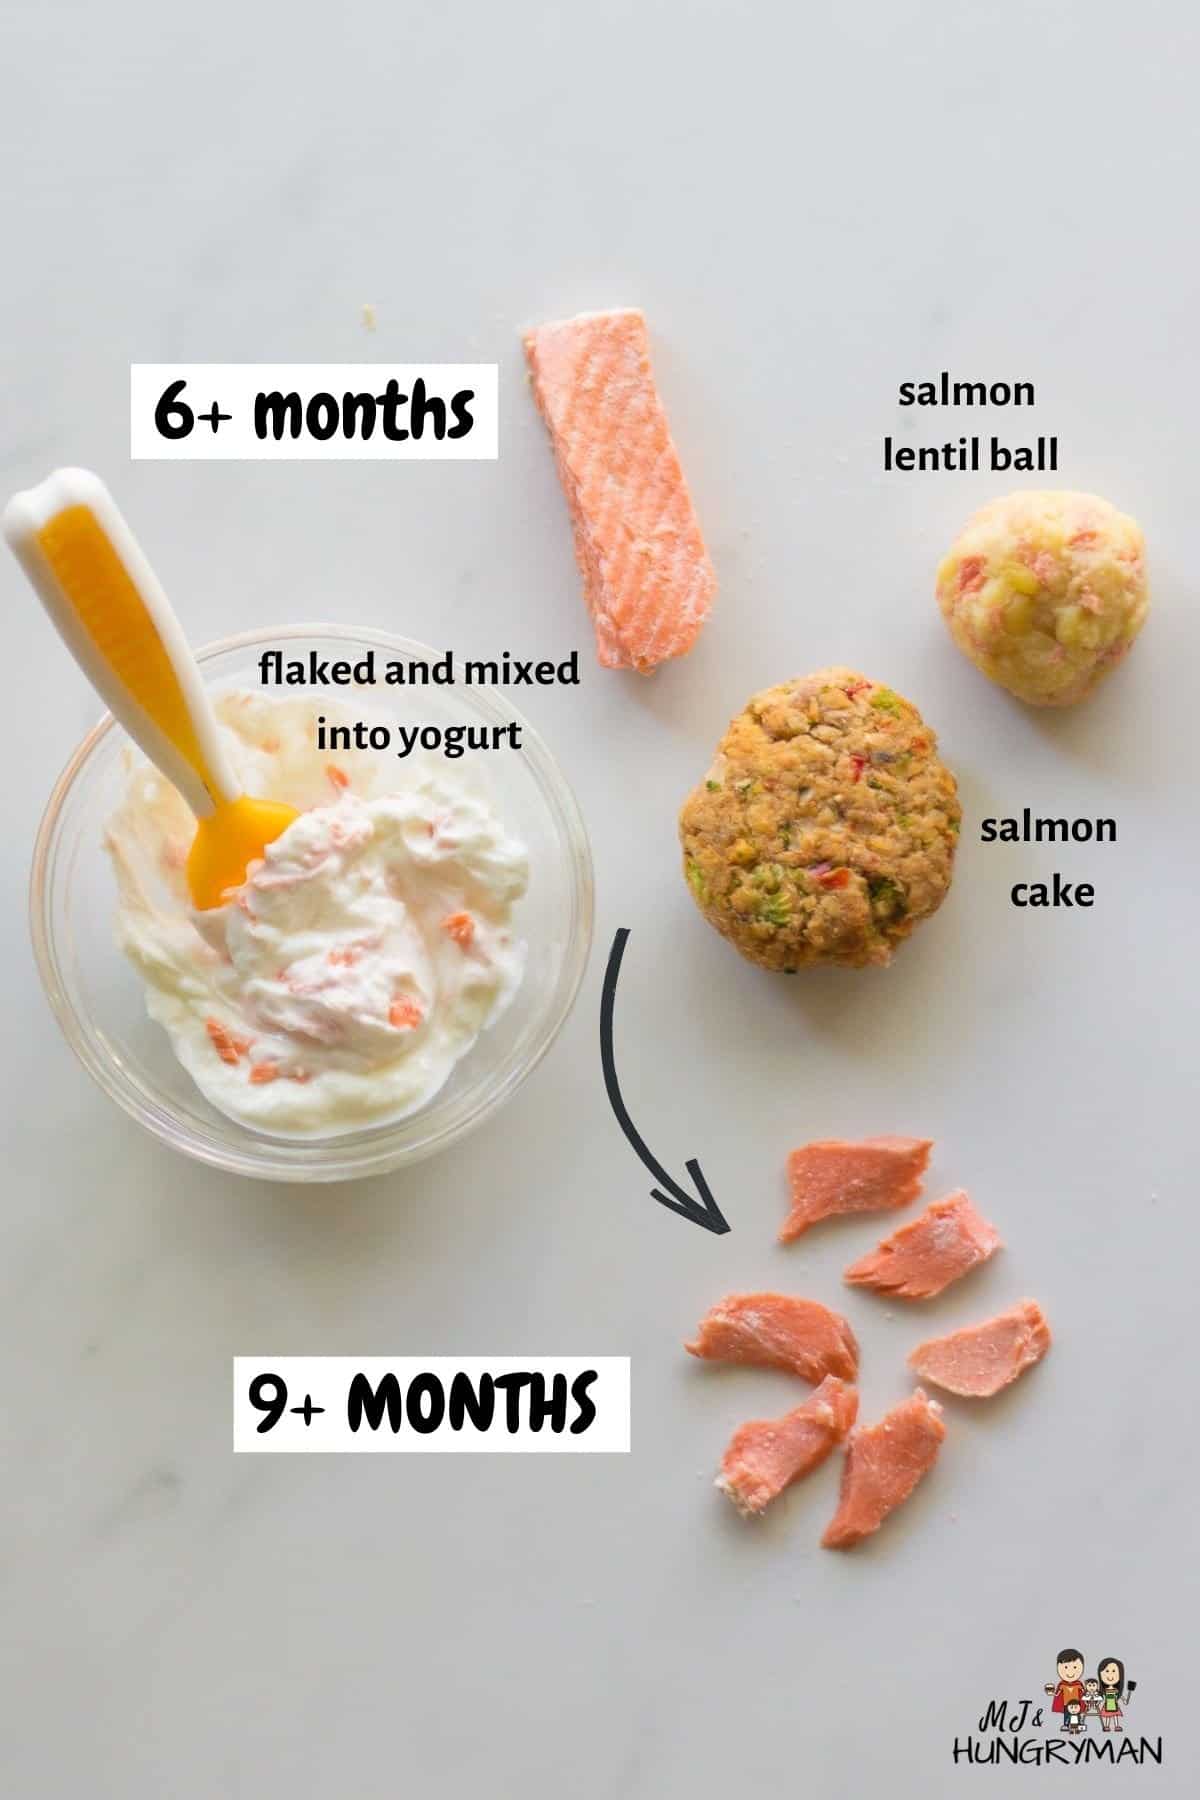 a visual of how to serve salmon for babies according to their age.